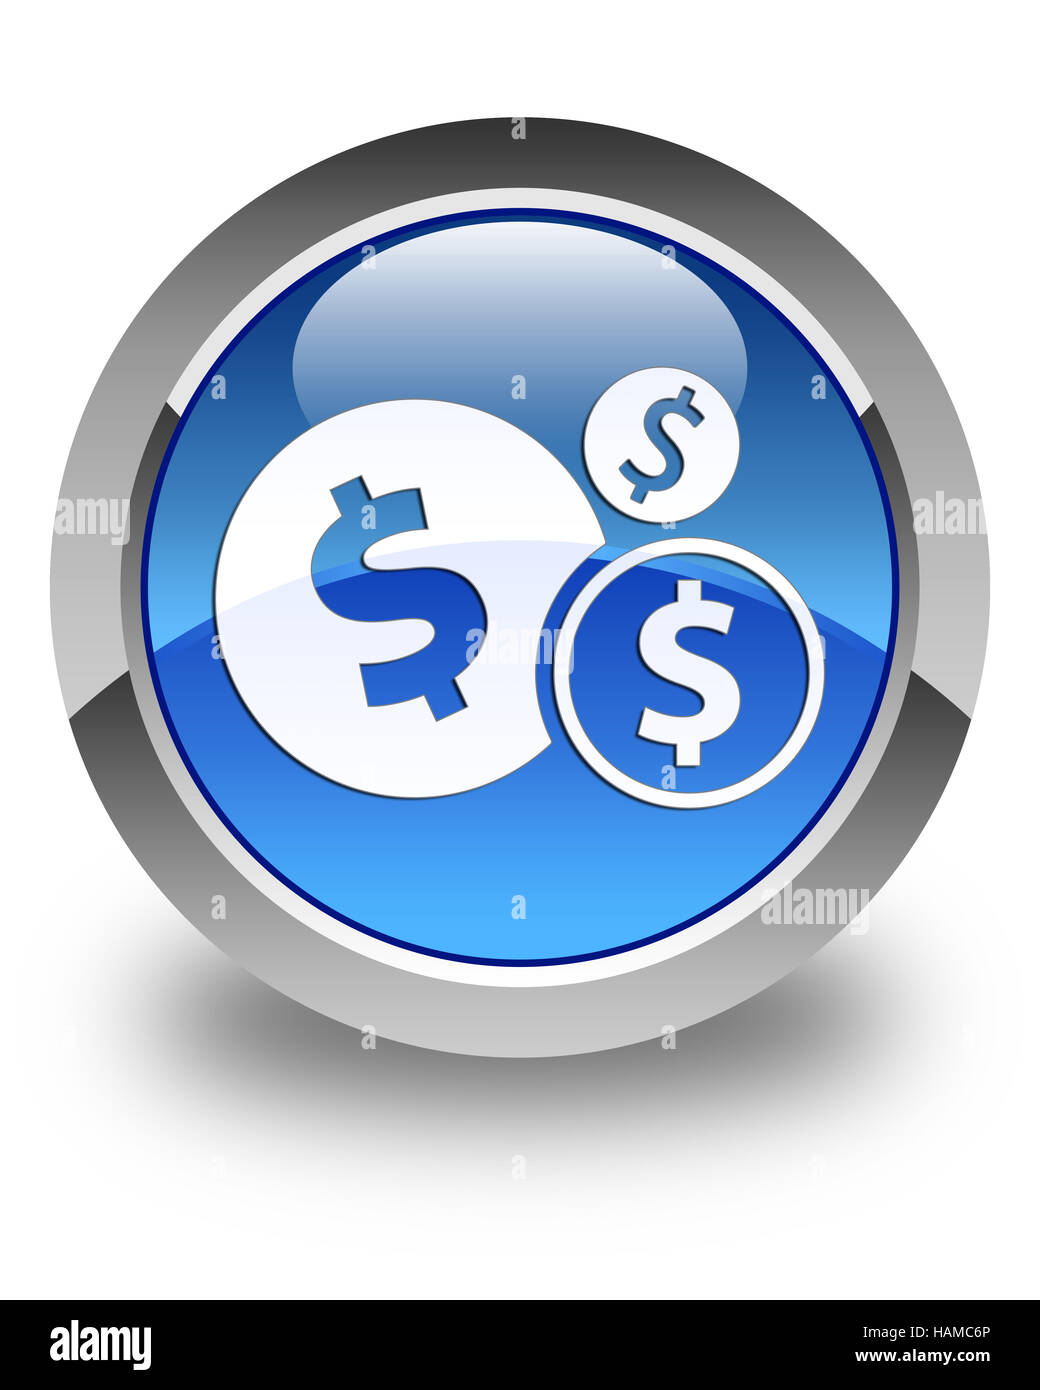 Finances dollar sign icon isolated on glossy blue round button Stock Photo  - Alamy